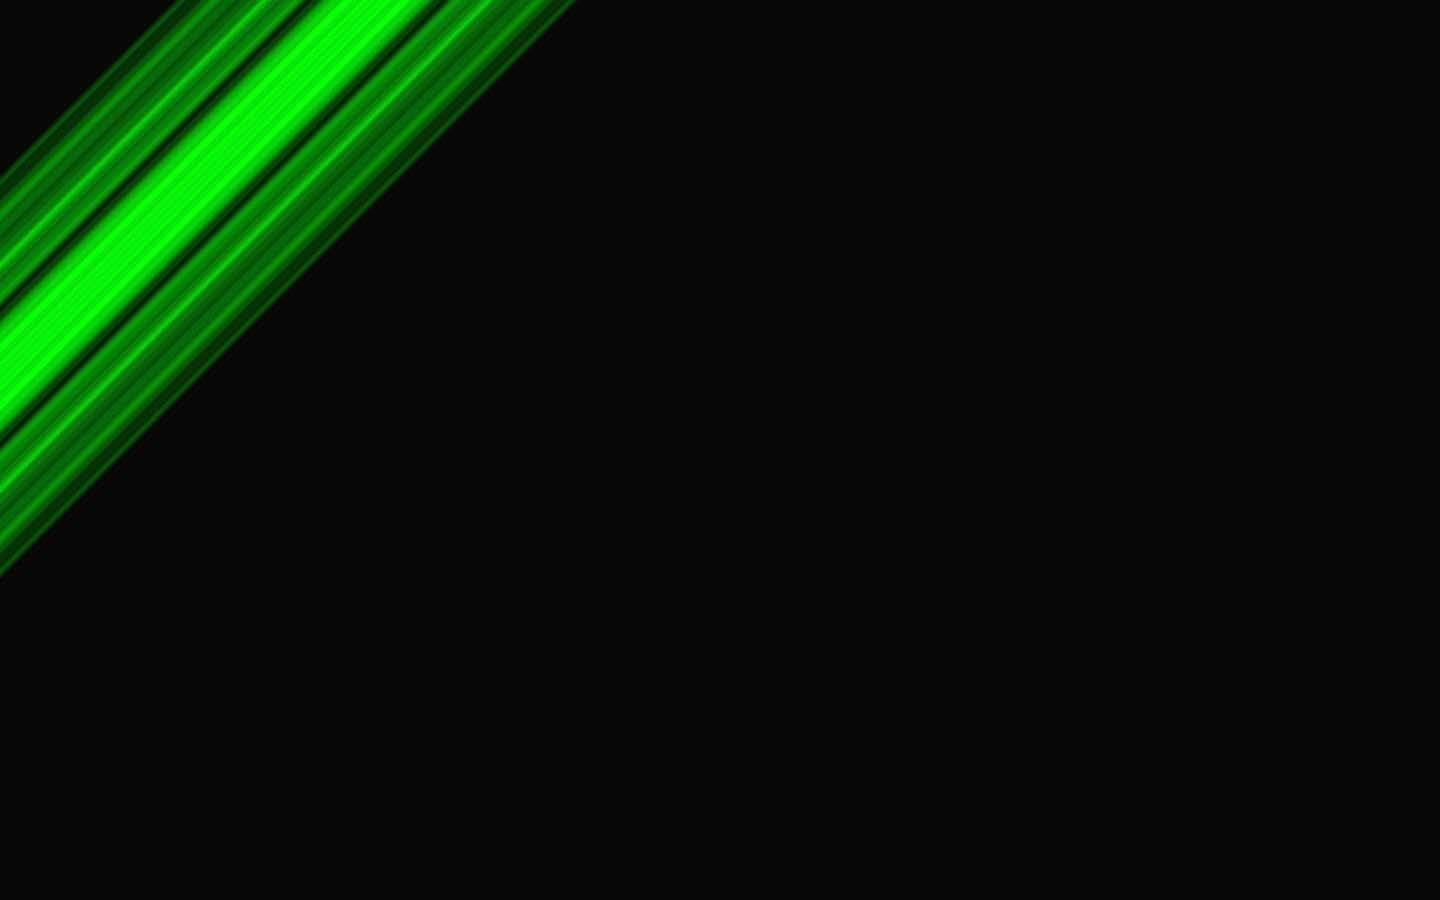 10 New Lime Green And Black Background FULL HD 1080p For PC Background